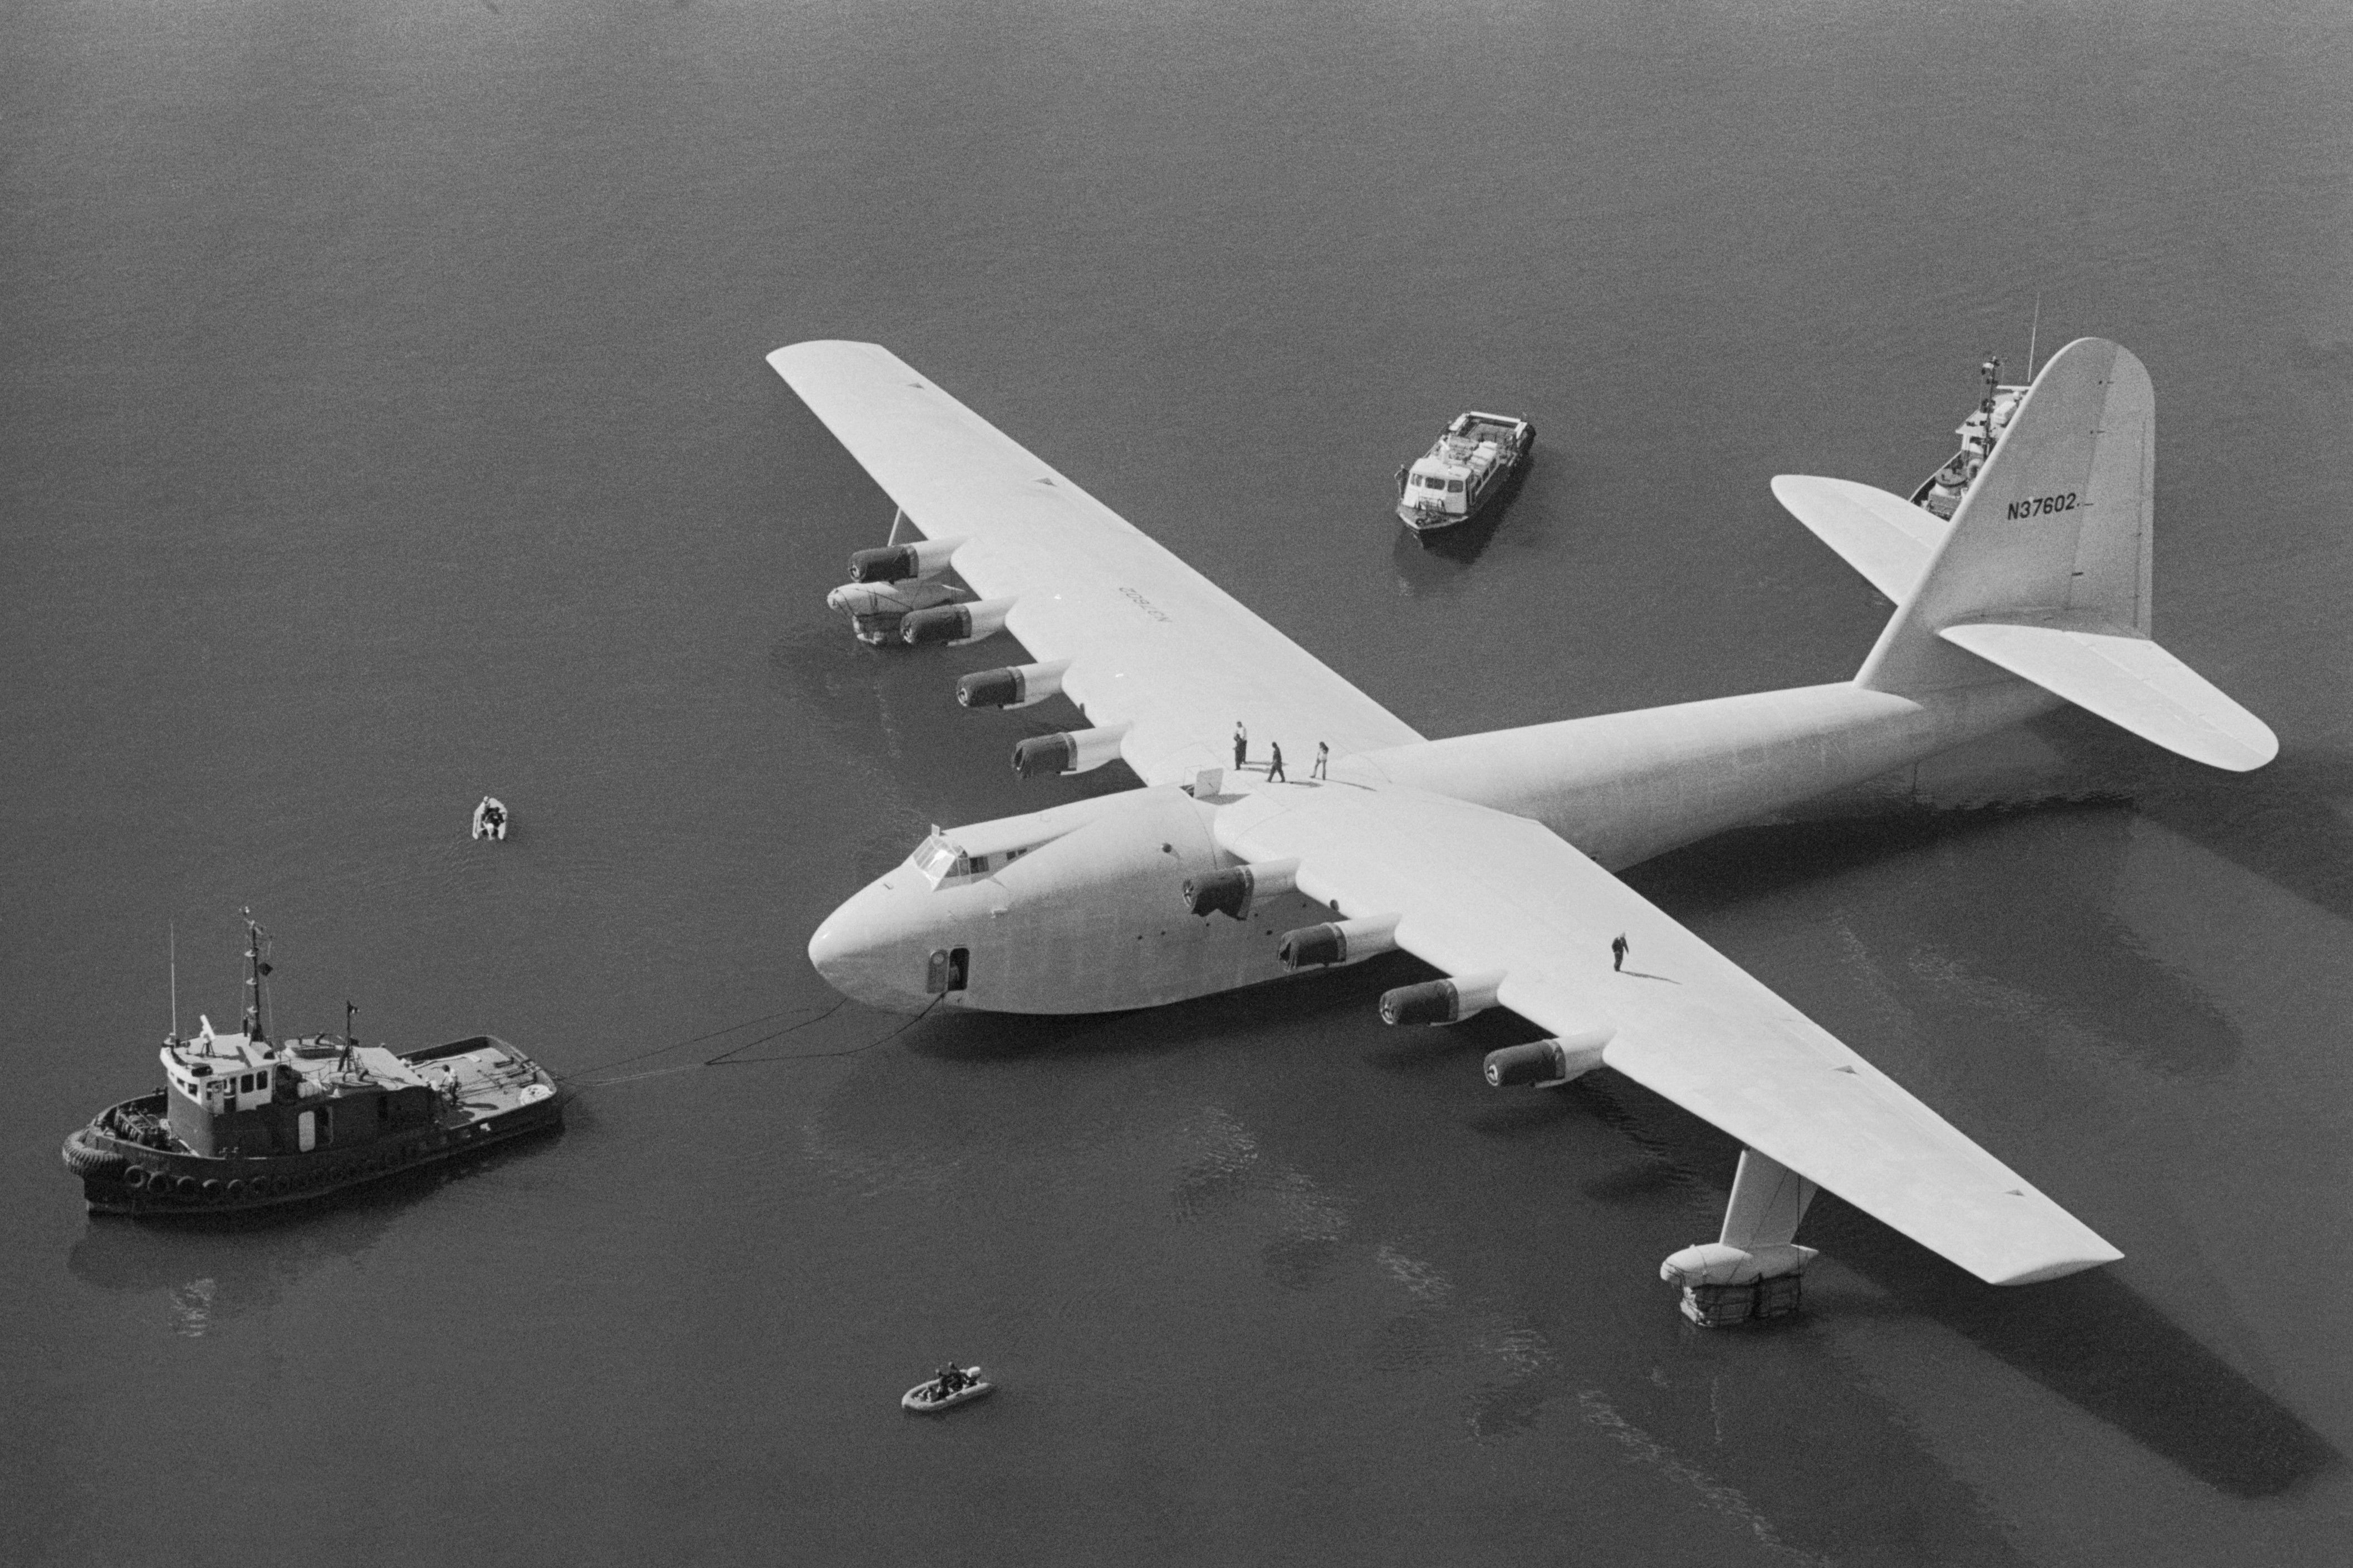 The Spruce Goose prototype on water